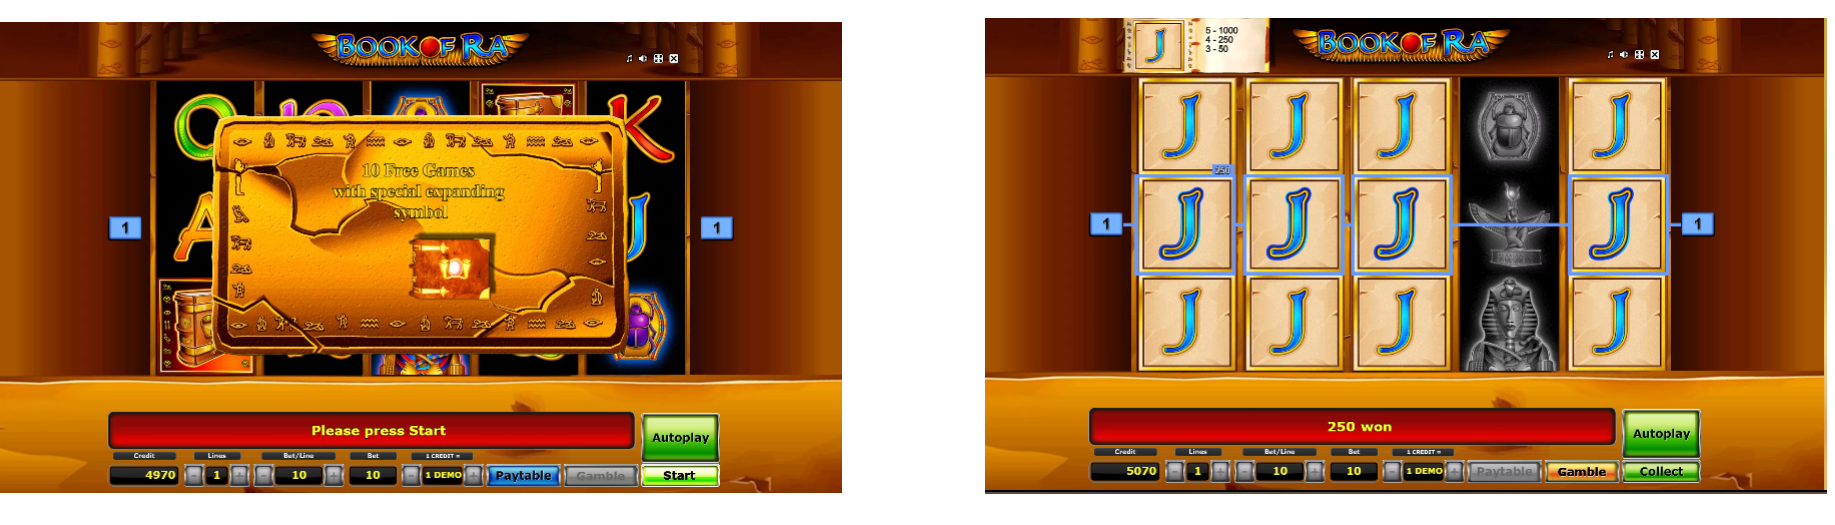 Book of Ra Slot Game-free spins